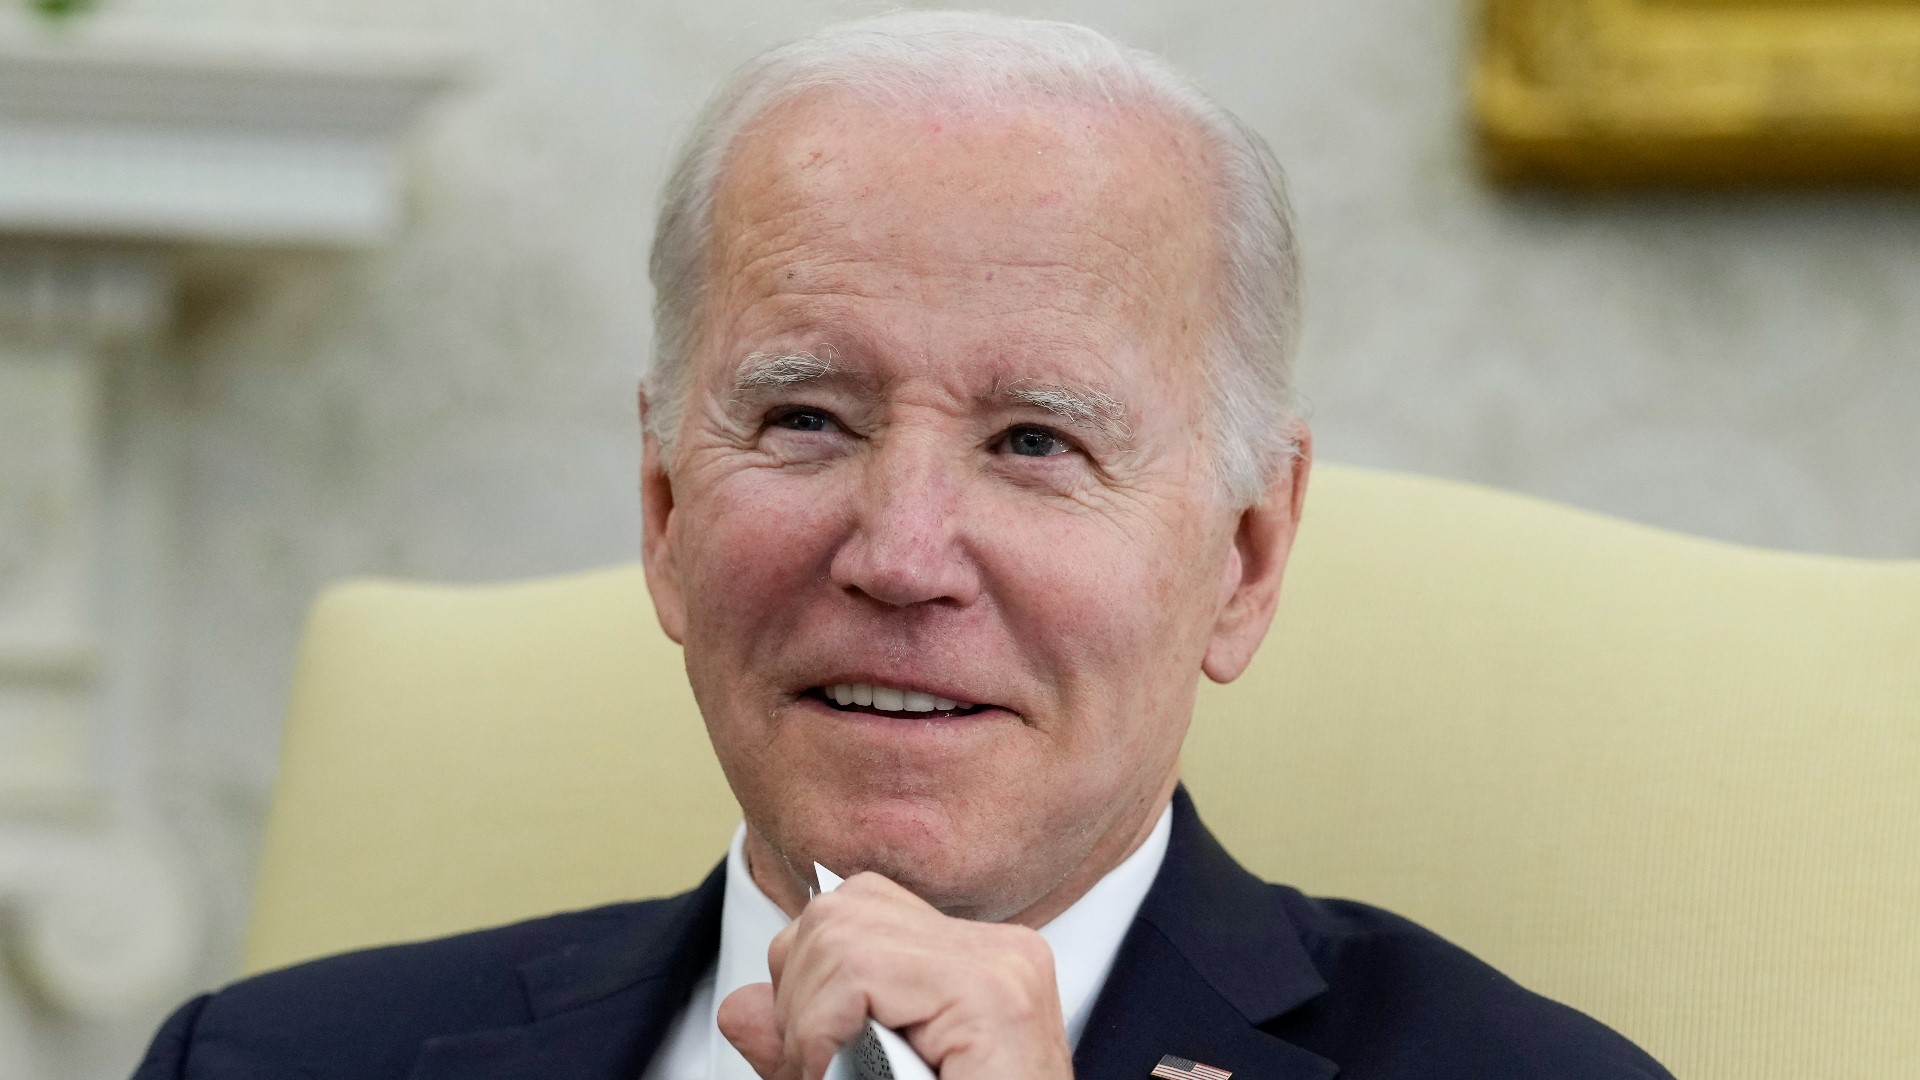 The 2024 campaign was widely expected, as Biden has been teasing a re-election bid for months.